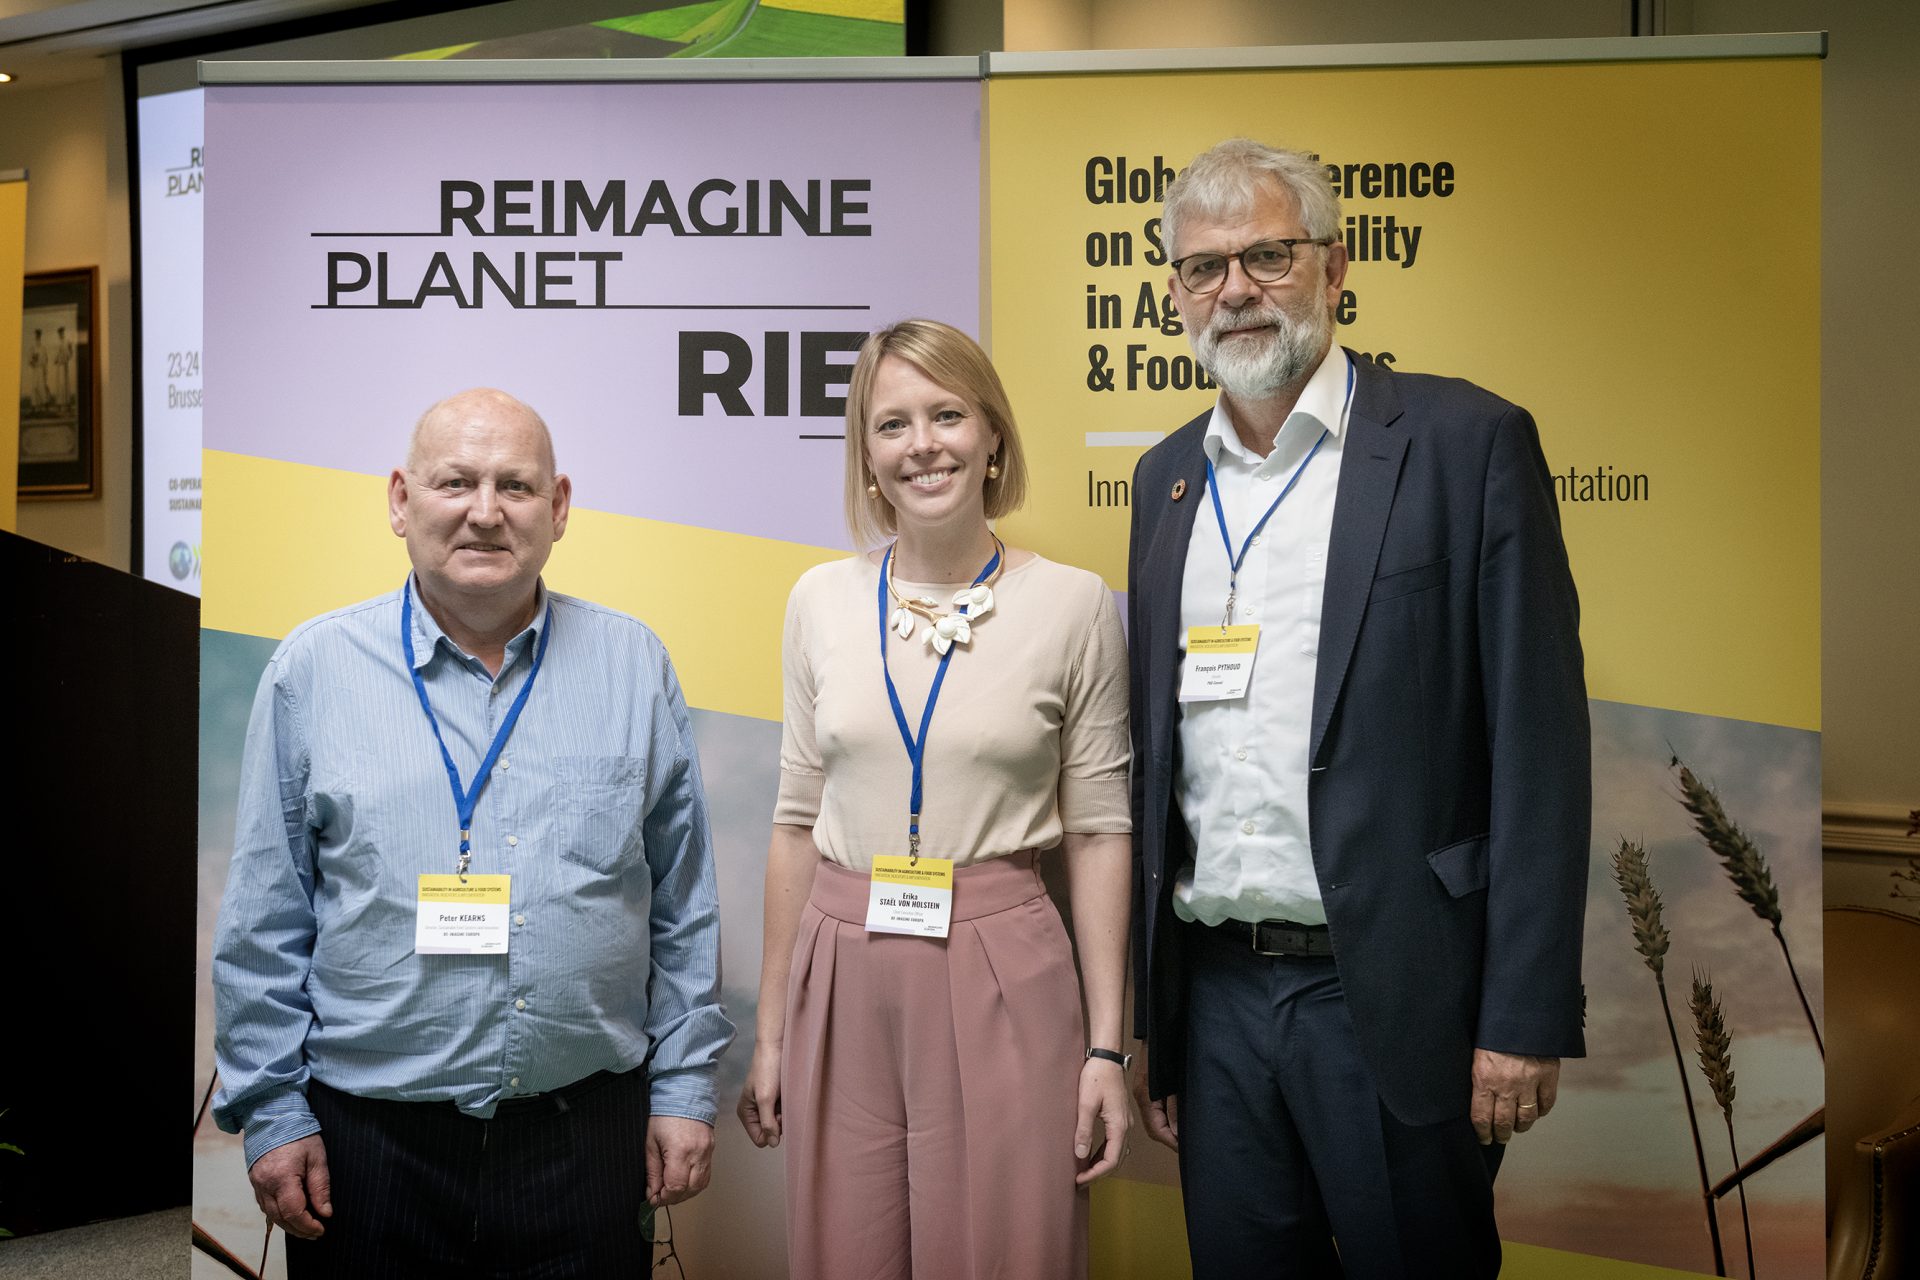 Dr Peter Kearns, Erika Staël von Holstein and Dr François Pythoud at the Global Conference on Sustainability in Agriculture & Food Systems